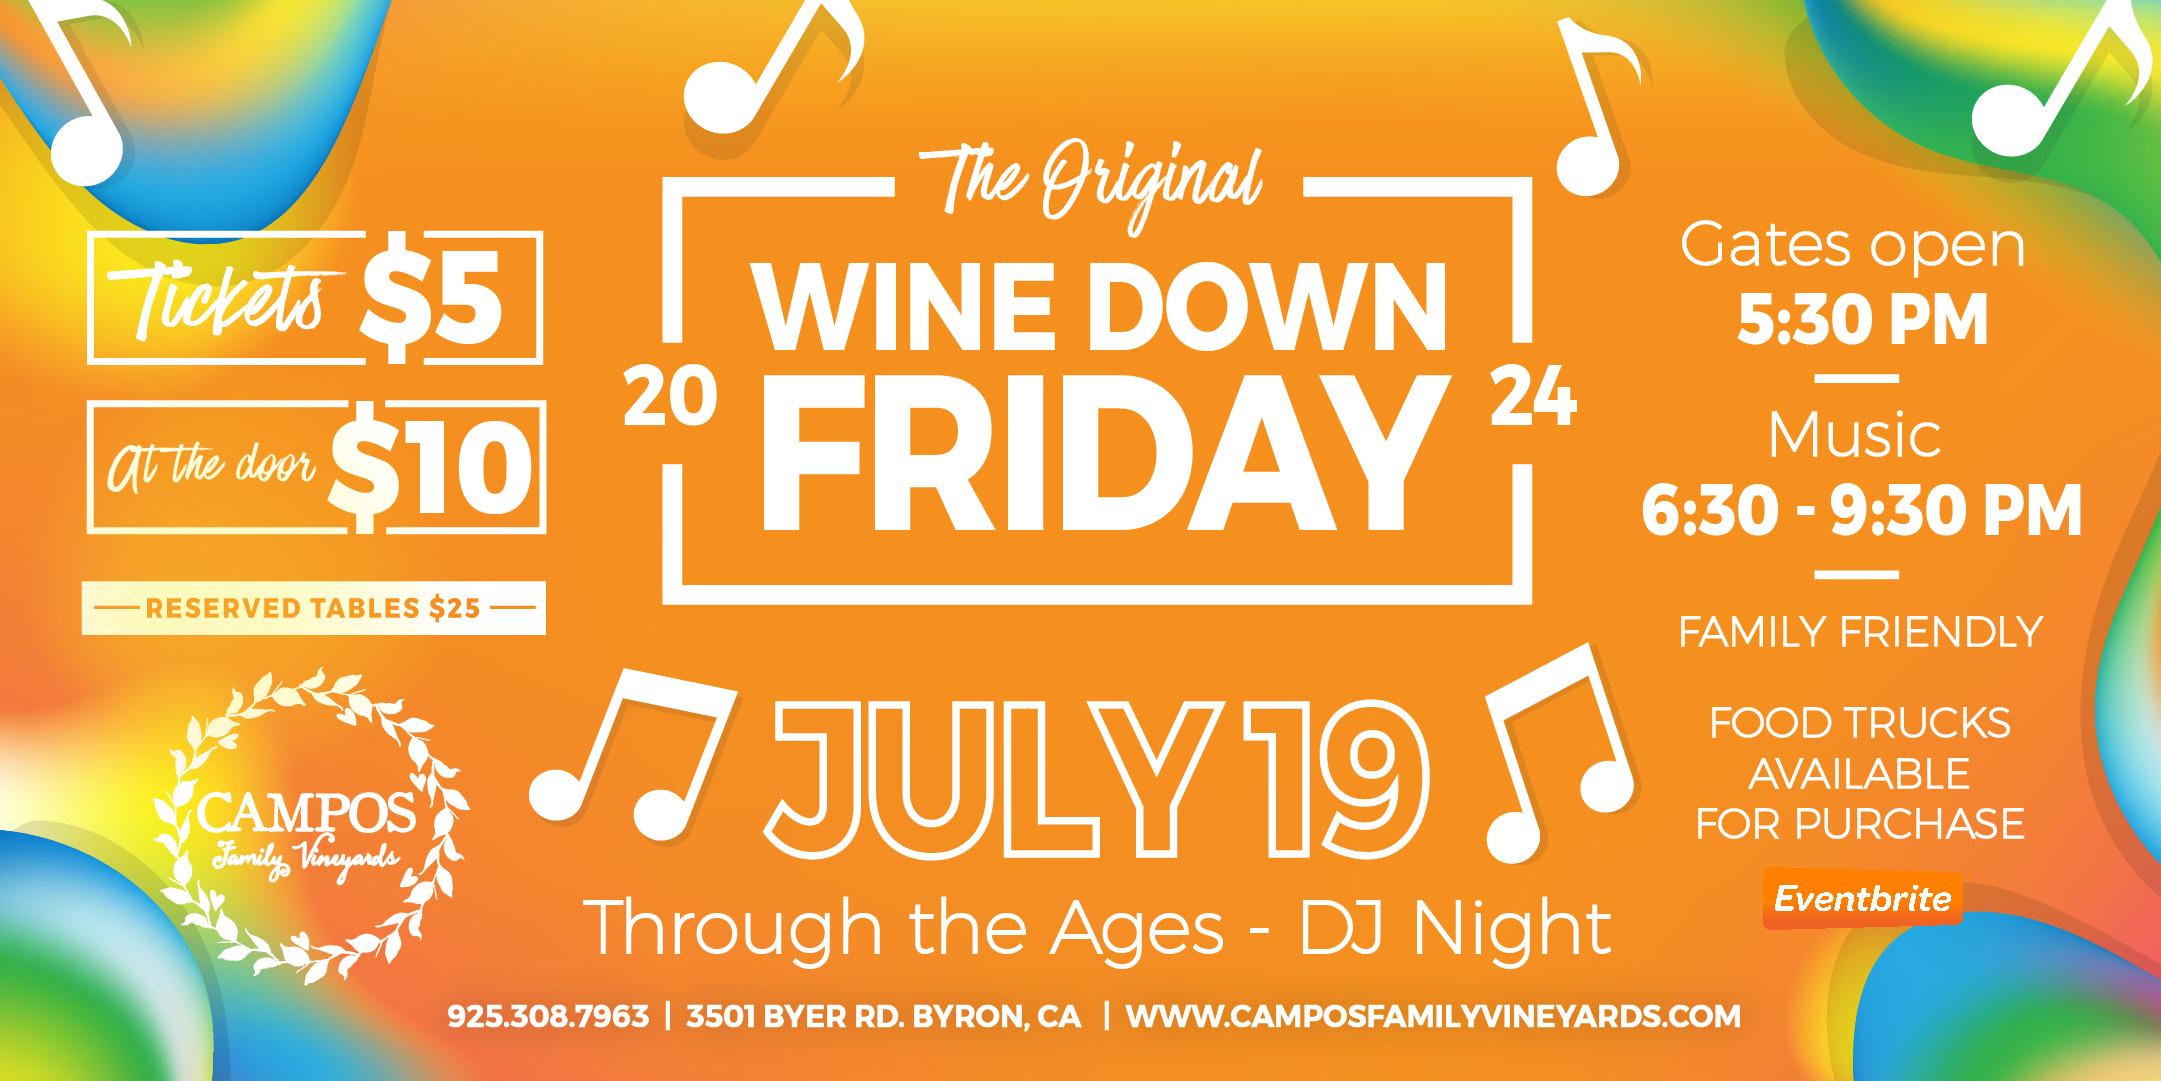 The Original Wine Down Friday - DJ Tony - Music through the Ages!